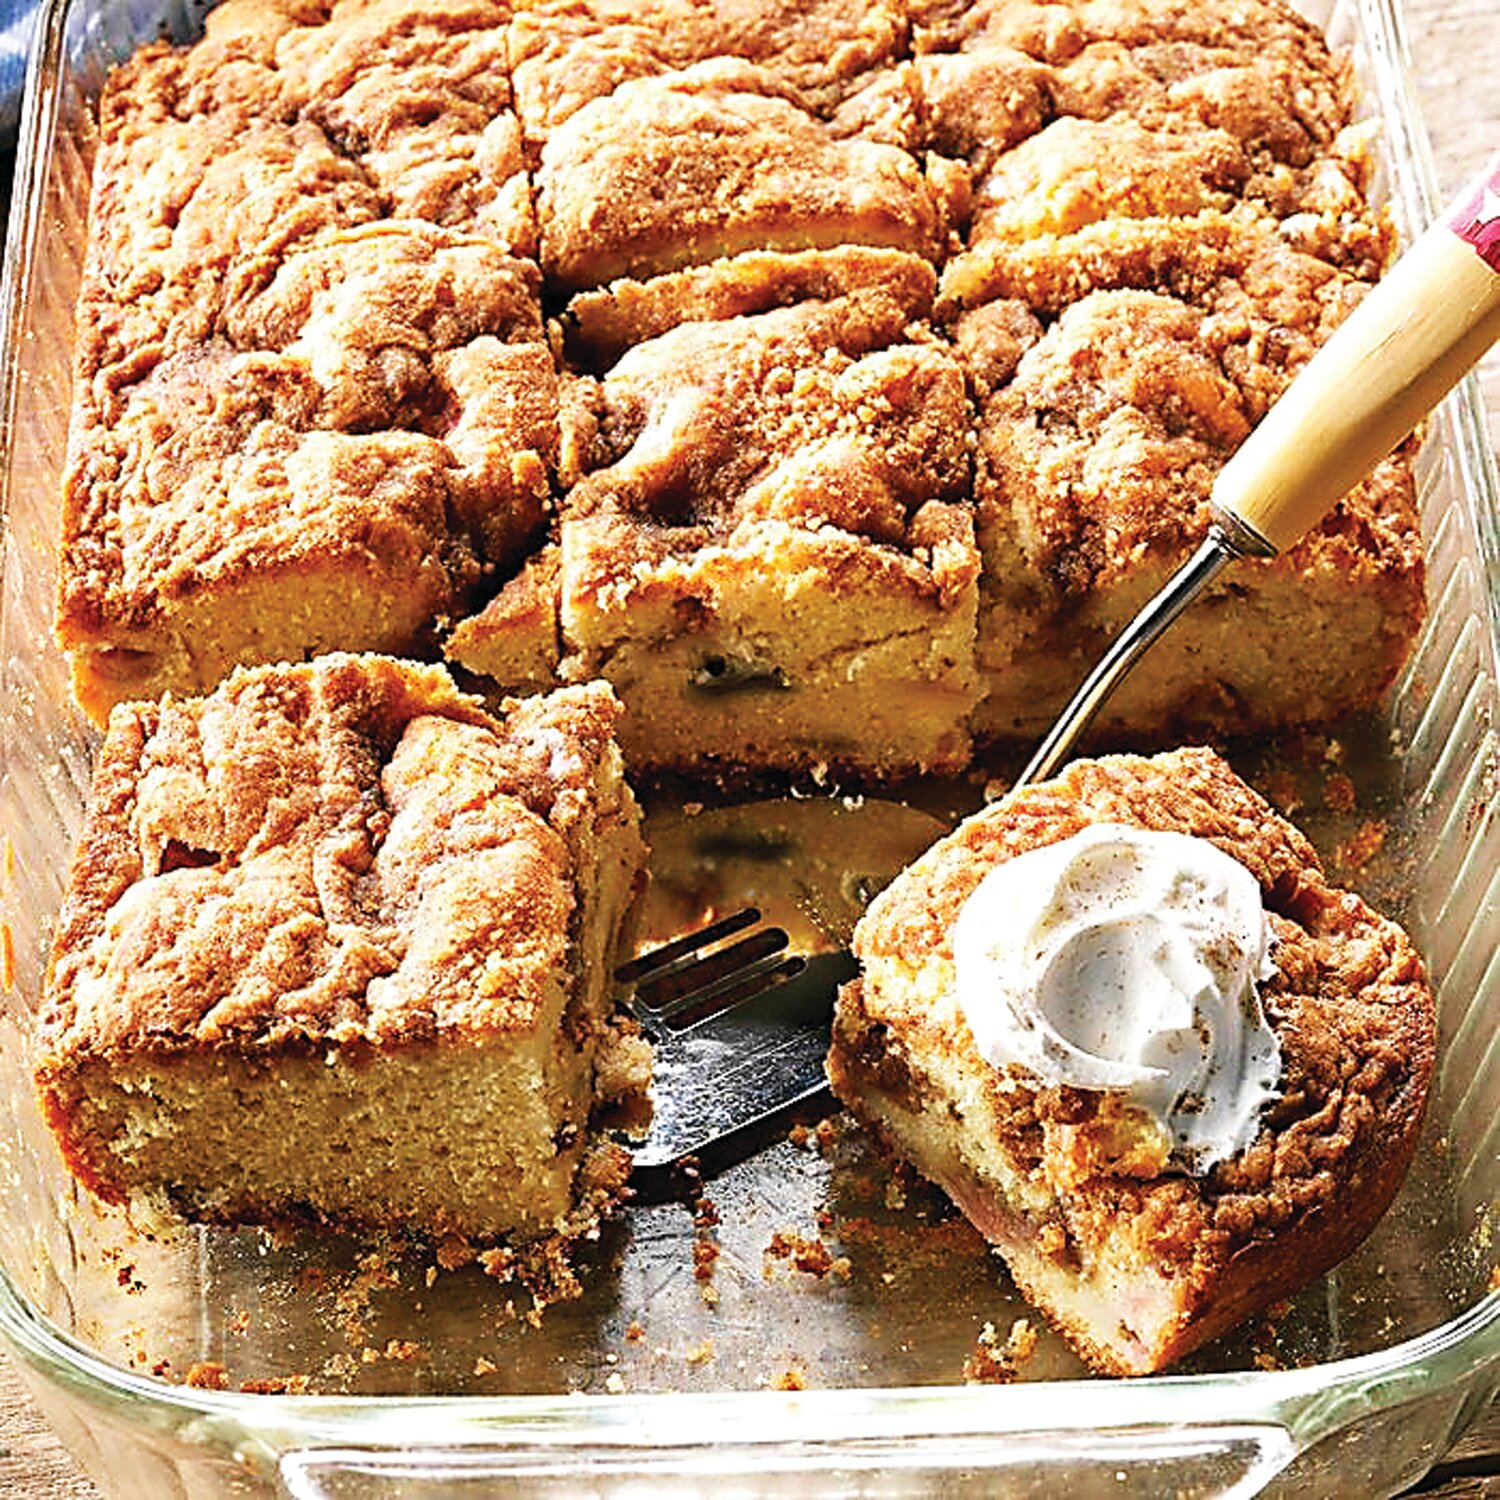 This simple coffee cake features rhubarb, now in season locally, as a main ingredient.  Rick’s Egg Farm in Kintnersville is known for its outstanding rhubarb crop.